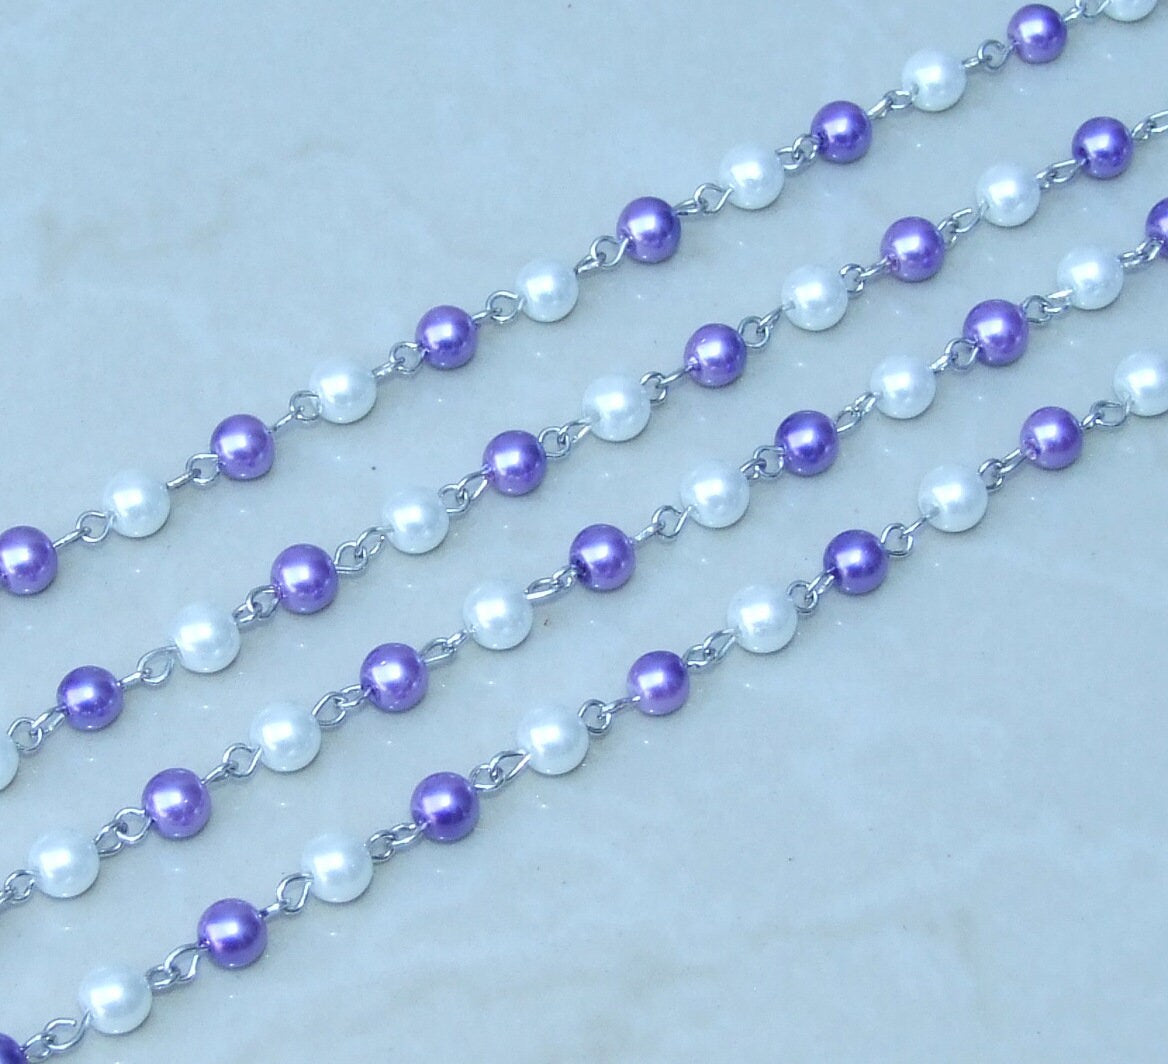 White & Purple Pearl Rosary Chain, 1 Meter, Glass Beads, Beaded Chain, Body Chain Jewelry, Silver Chain, Necklace Chain, Belly Chain, 6mm206